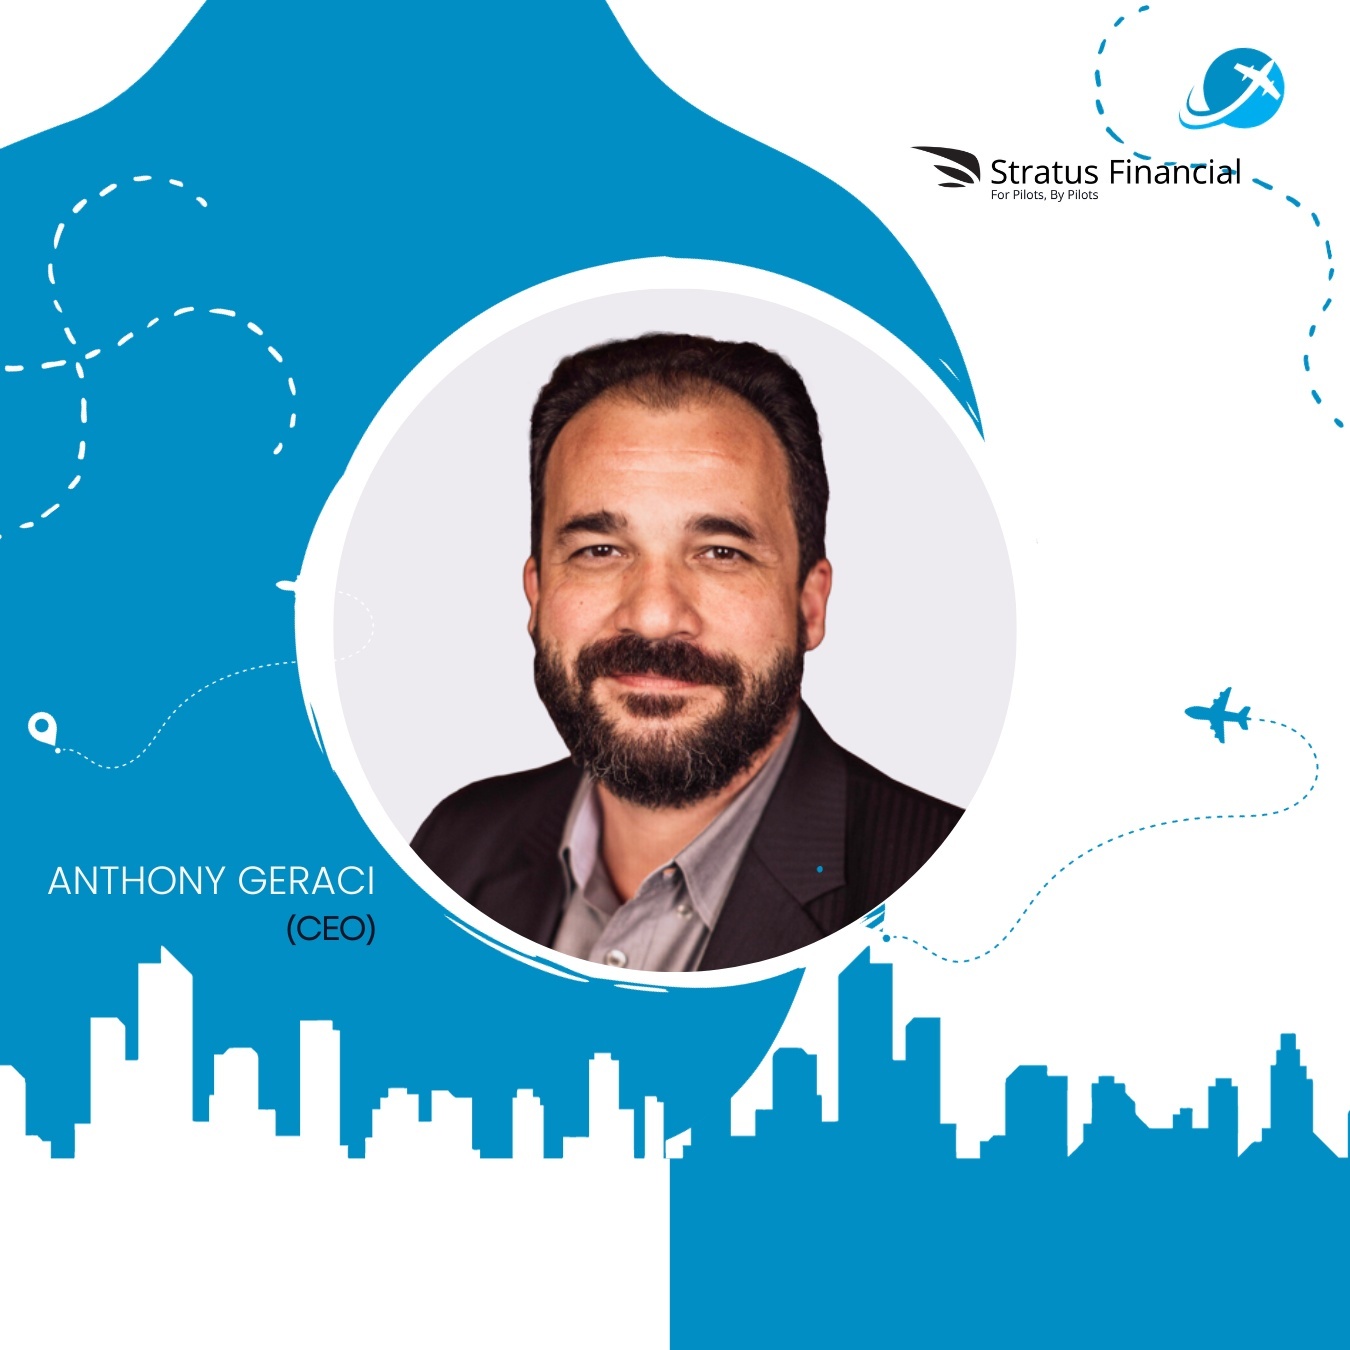 Meet Anthony Geraci, Stratus Financial’s CEO, leading the revolution in aviation financing with his vision and expertise.